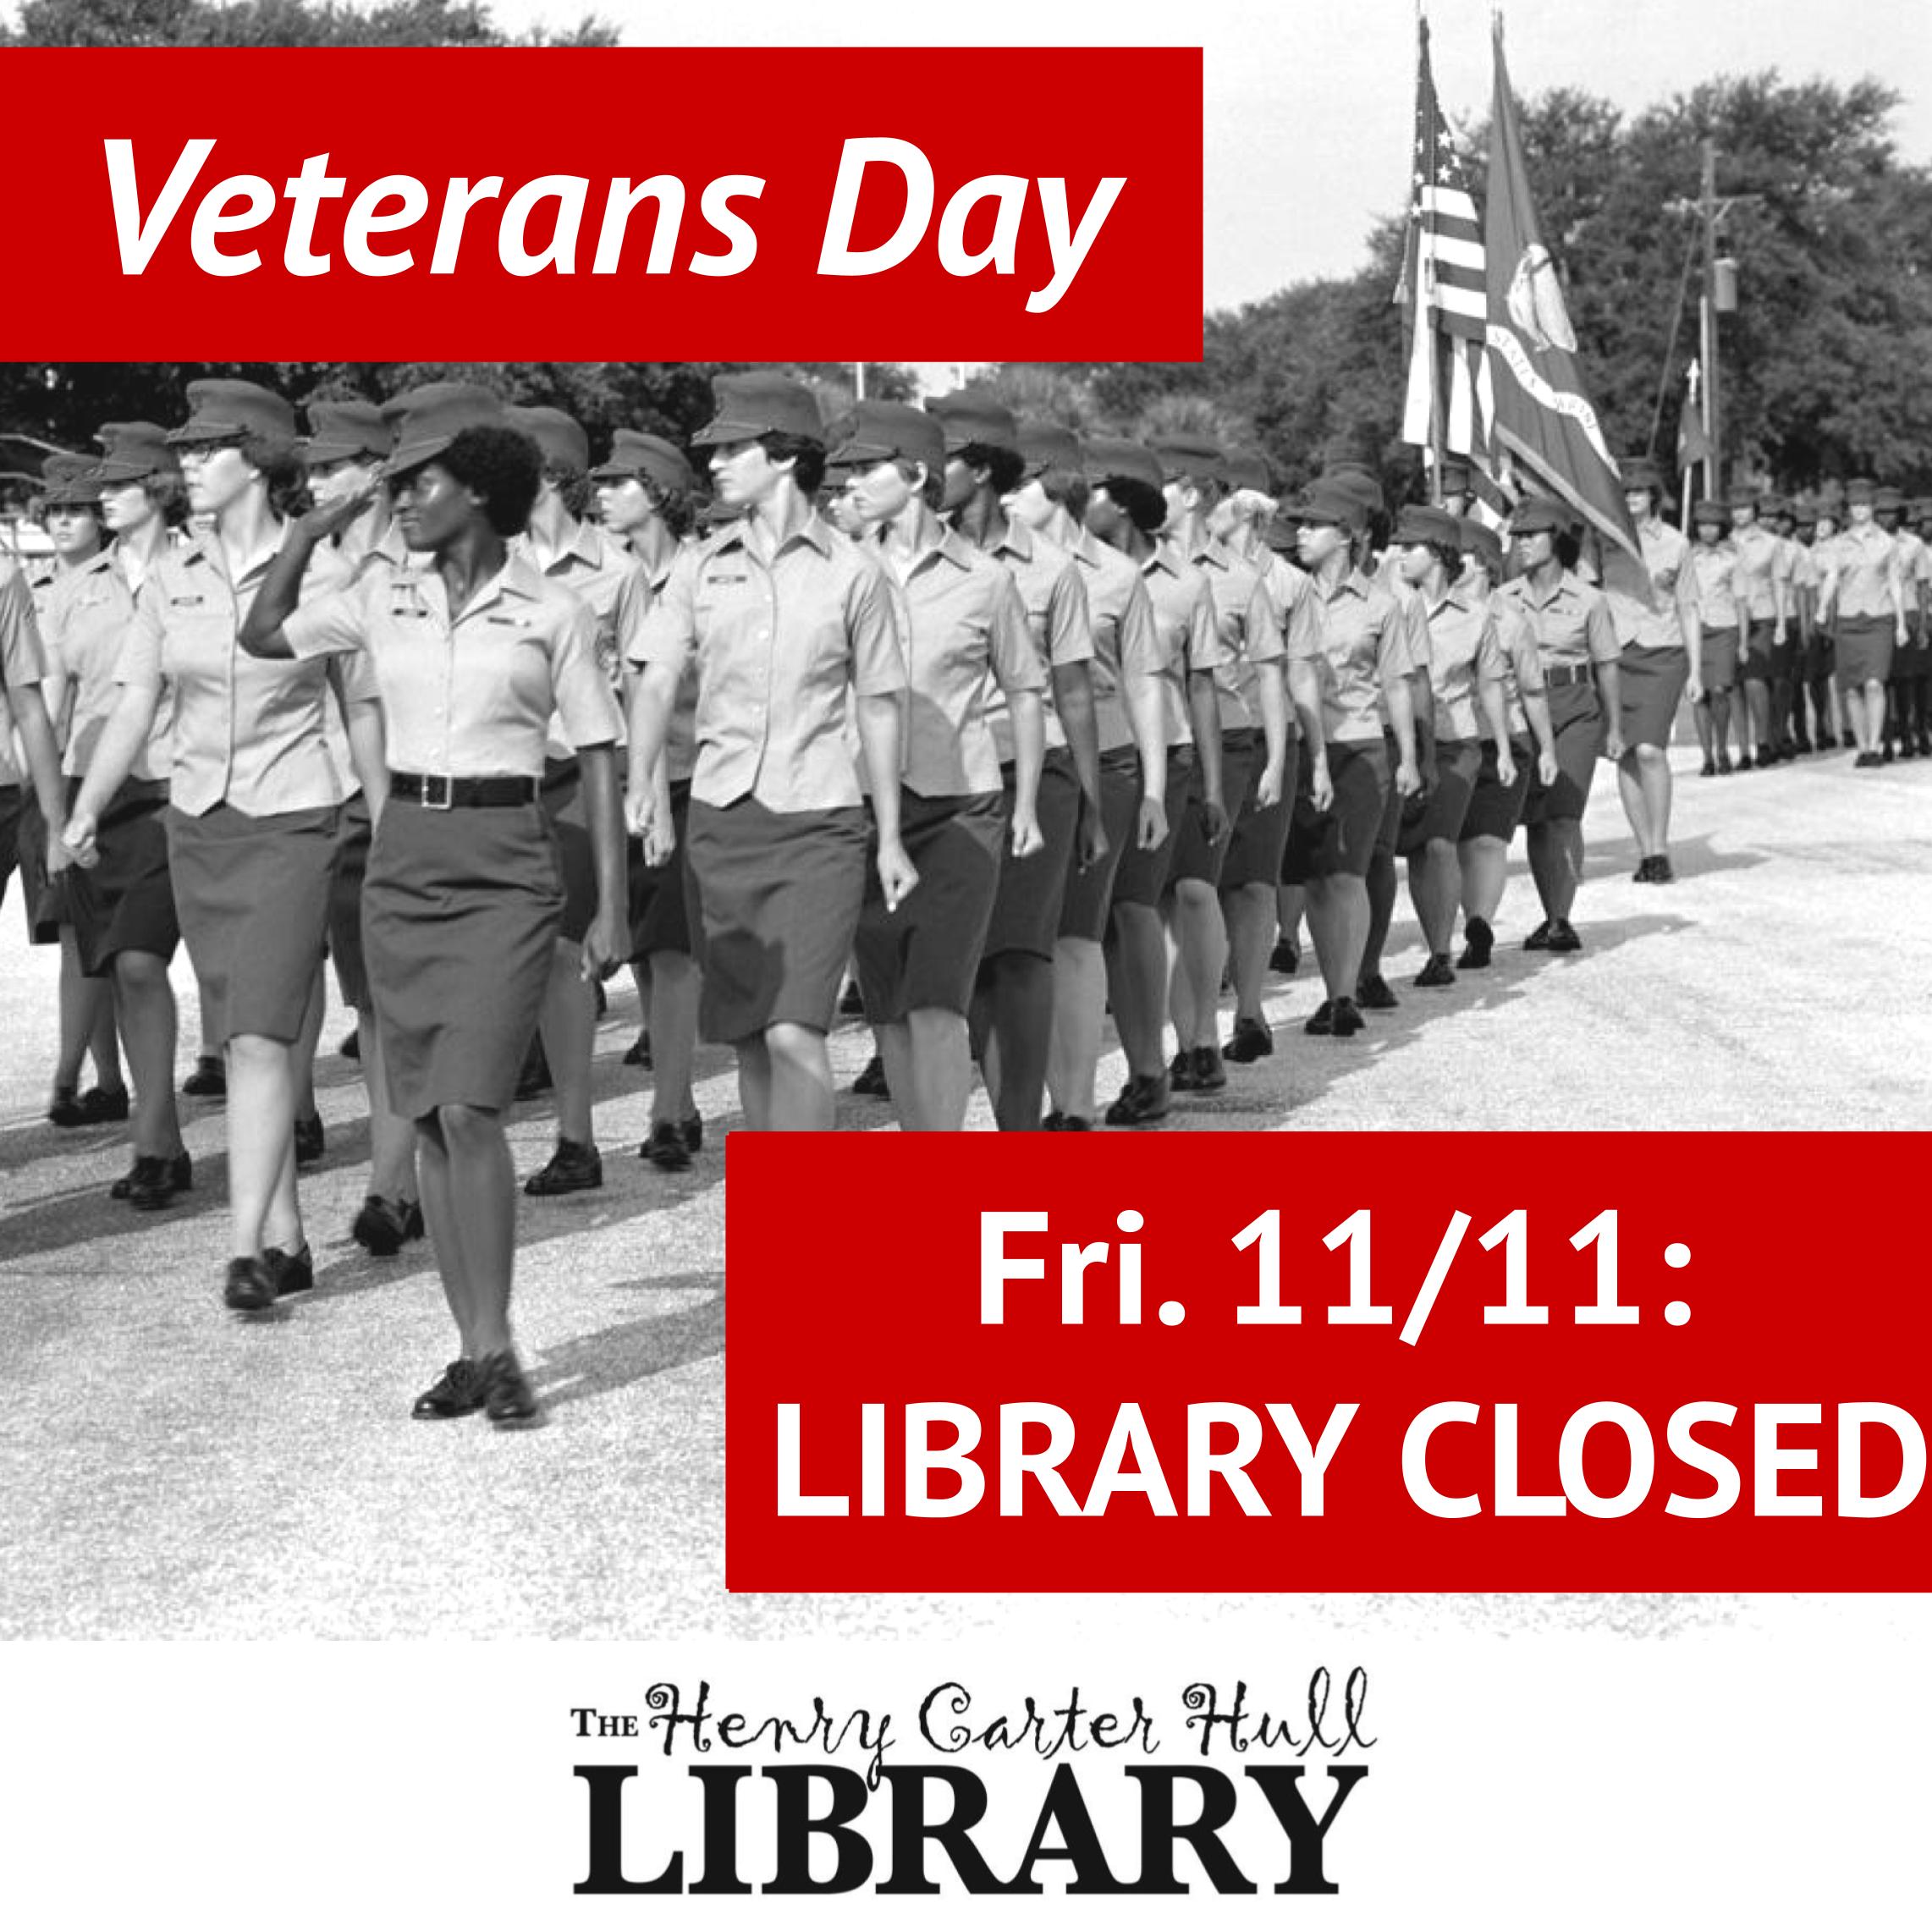 Library Closed for Veterans Day